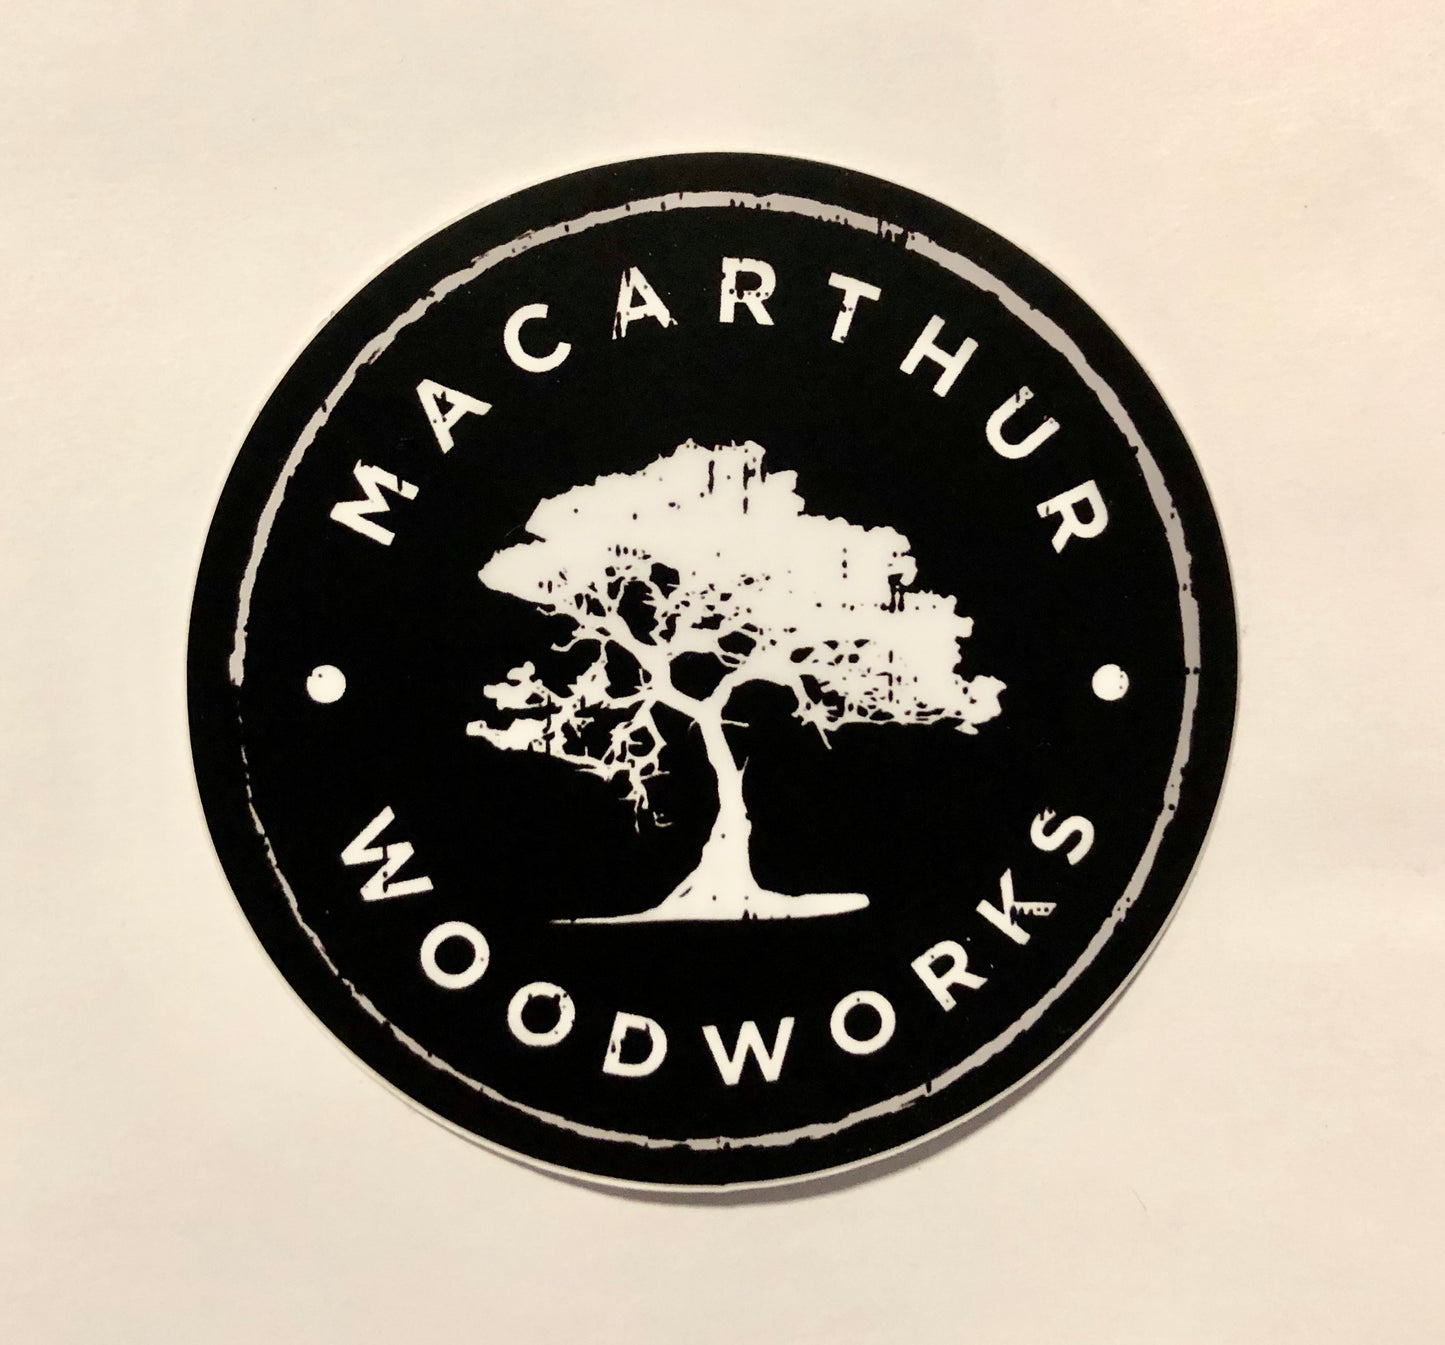 MacArthur Woodworks Sticker (Blacked Out - Limited Edition) [3 pack]